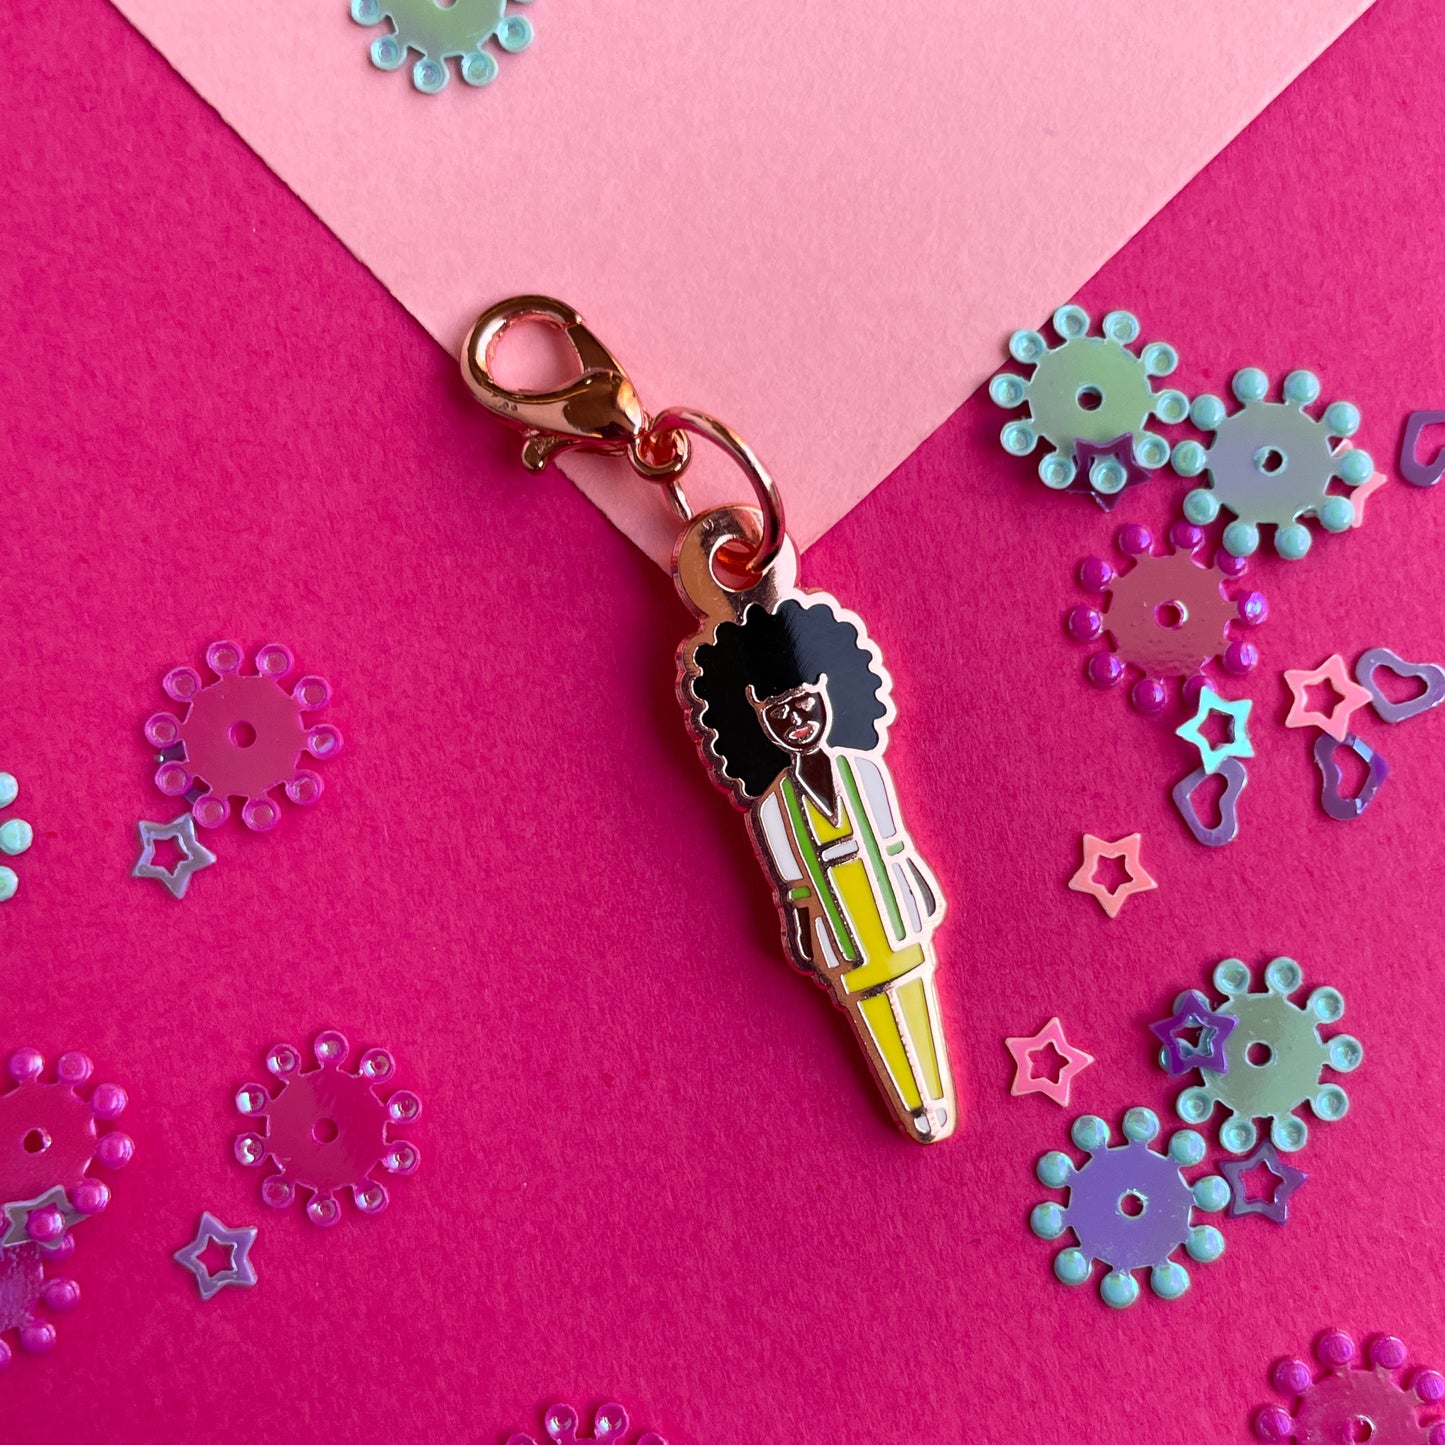 An enamel charm shaped like a barbie doll with dark brown skin and an afro in a yellow suit on a pink paper background.